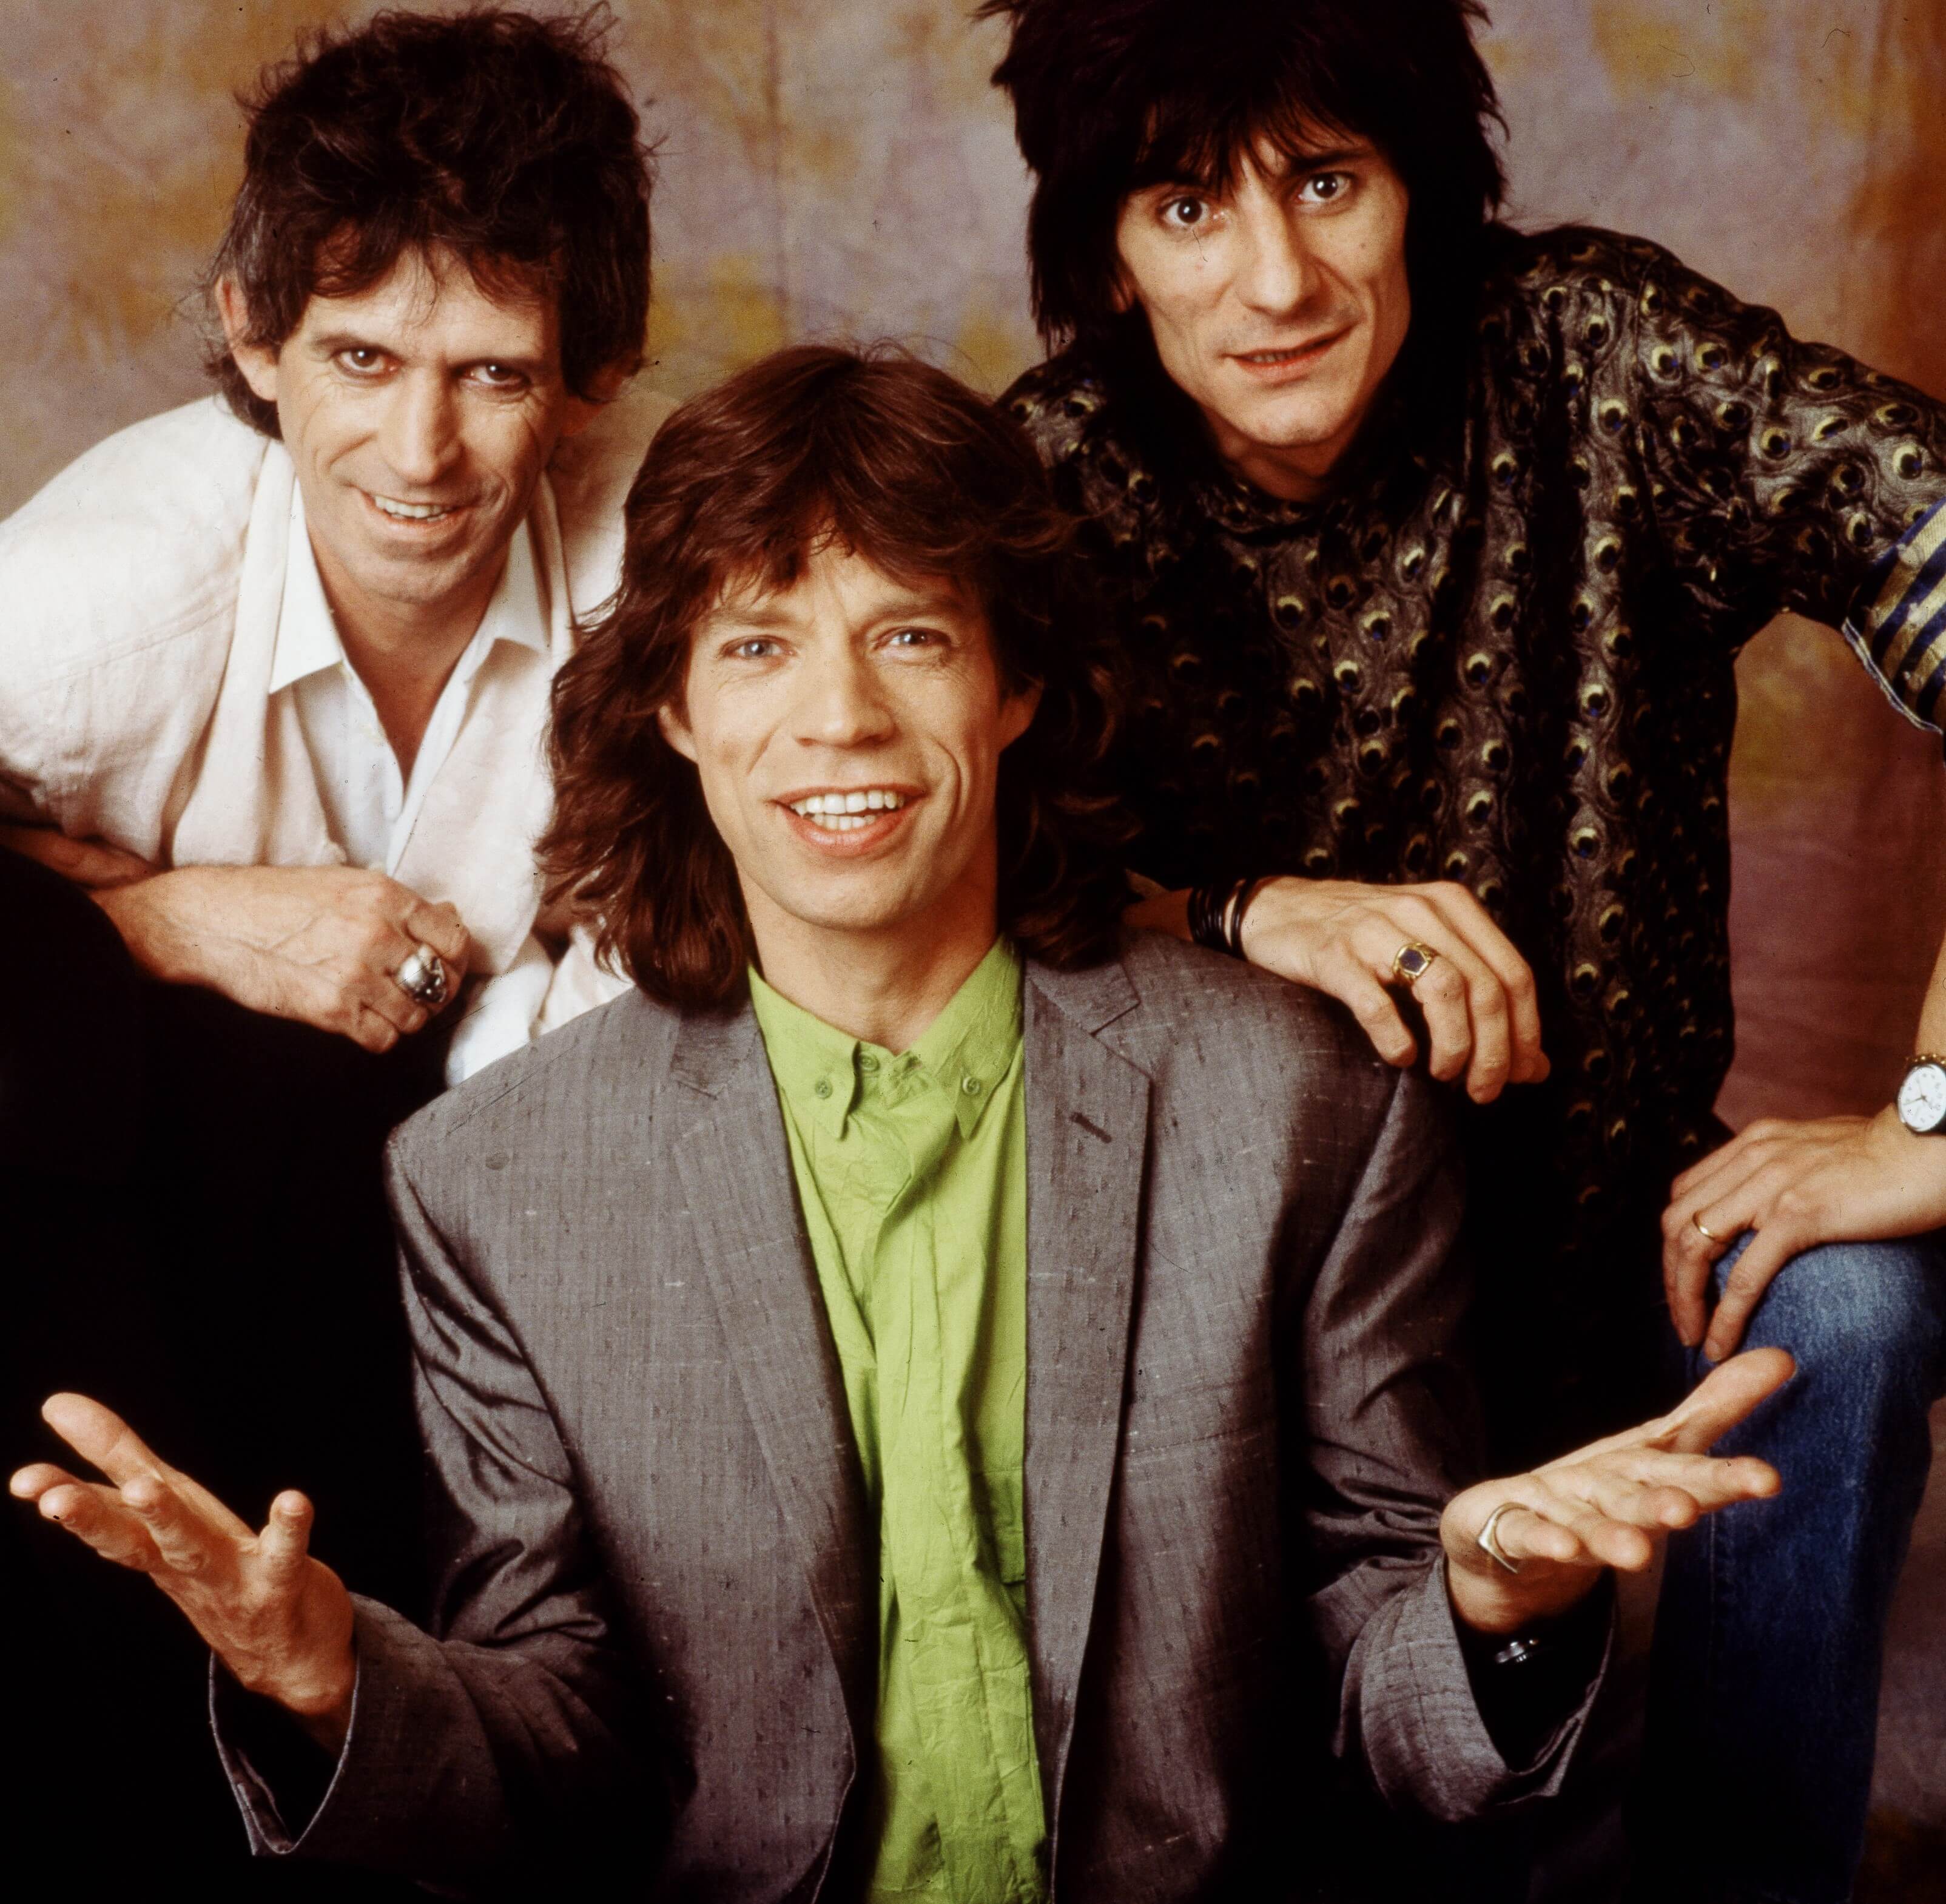 The Rolling Stones smiling during the "Start Me Up" era